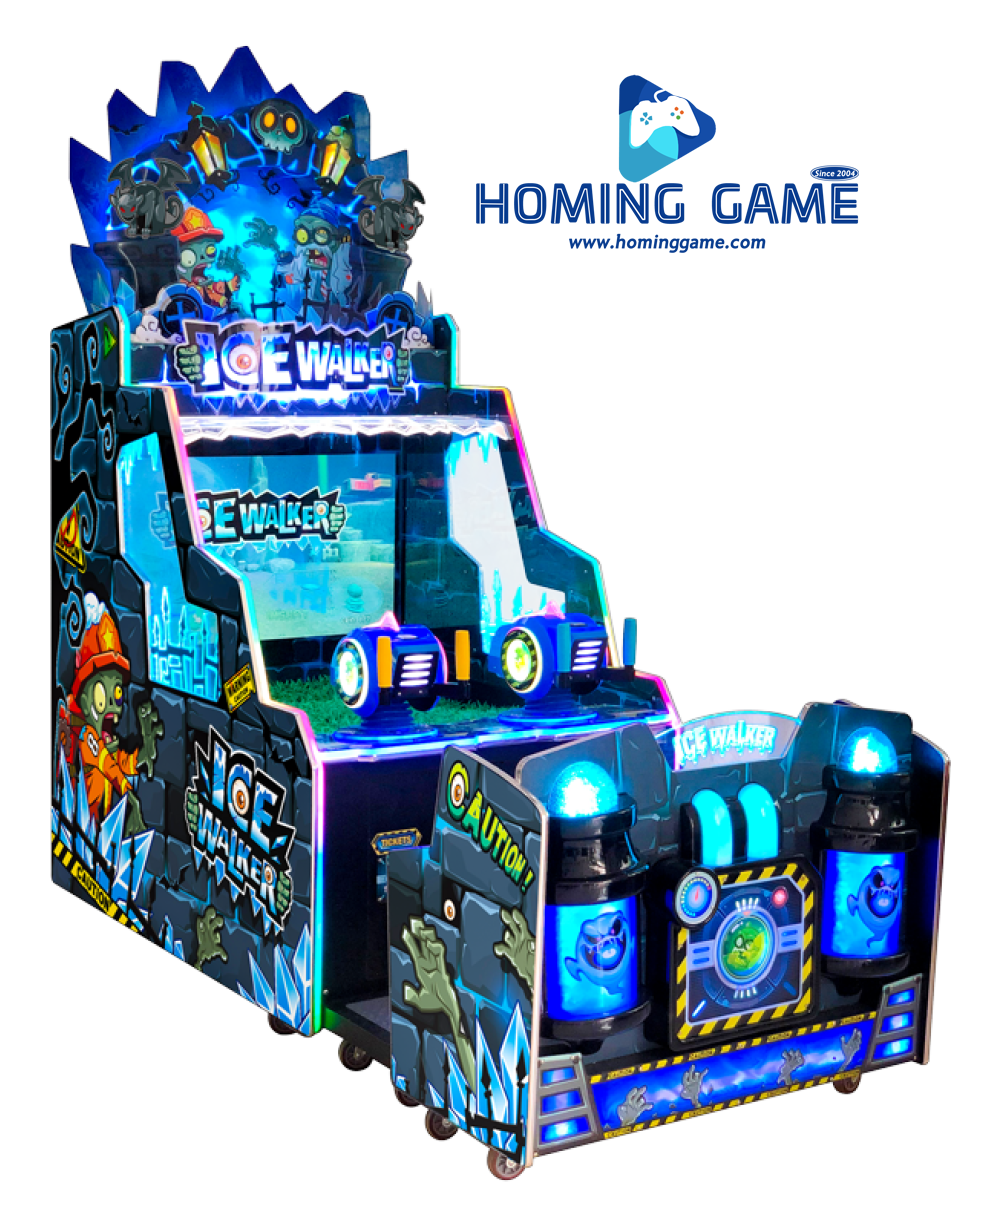 HomingGame New Released ICE WALKER 2 redemption shooting GAME MACHINE 2 players#gamemachine #game